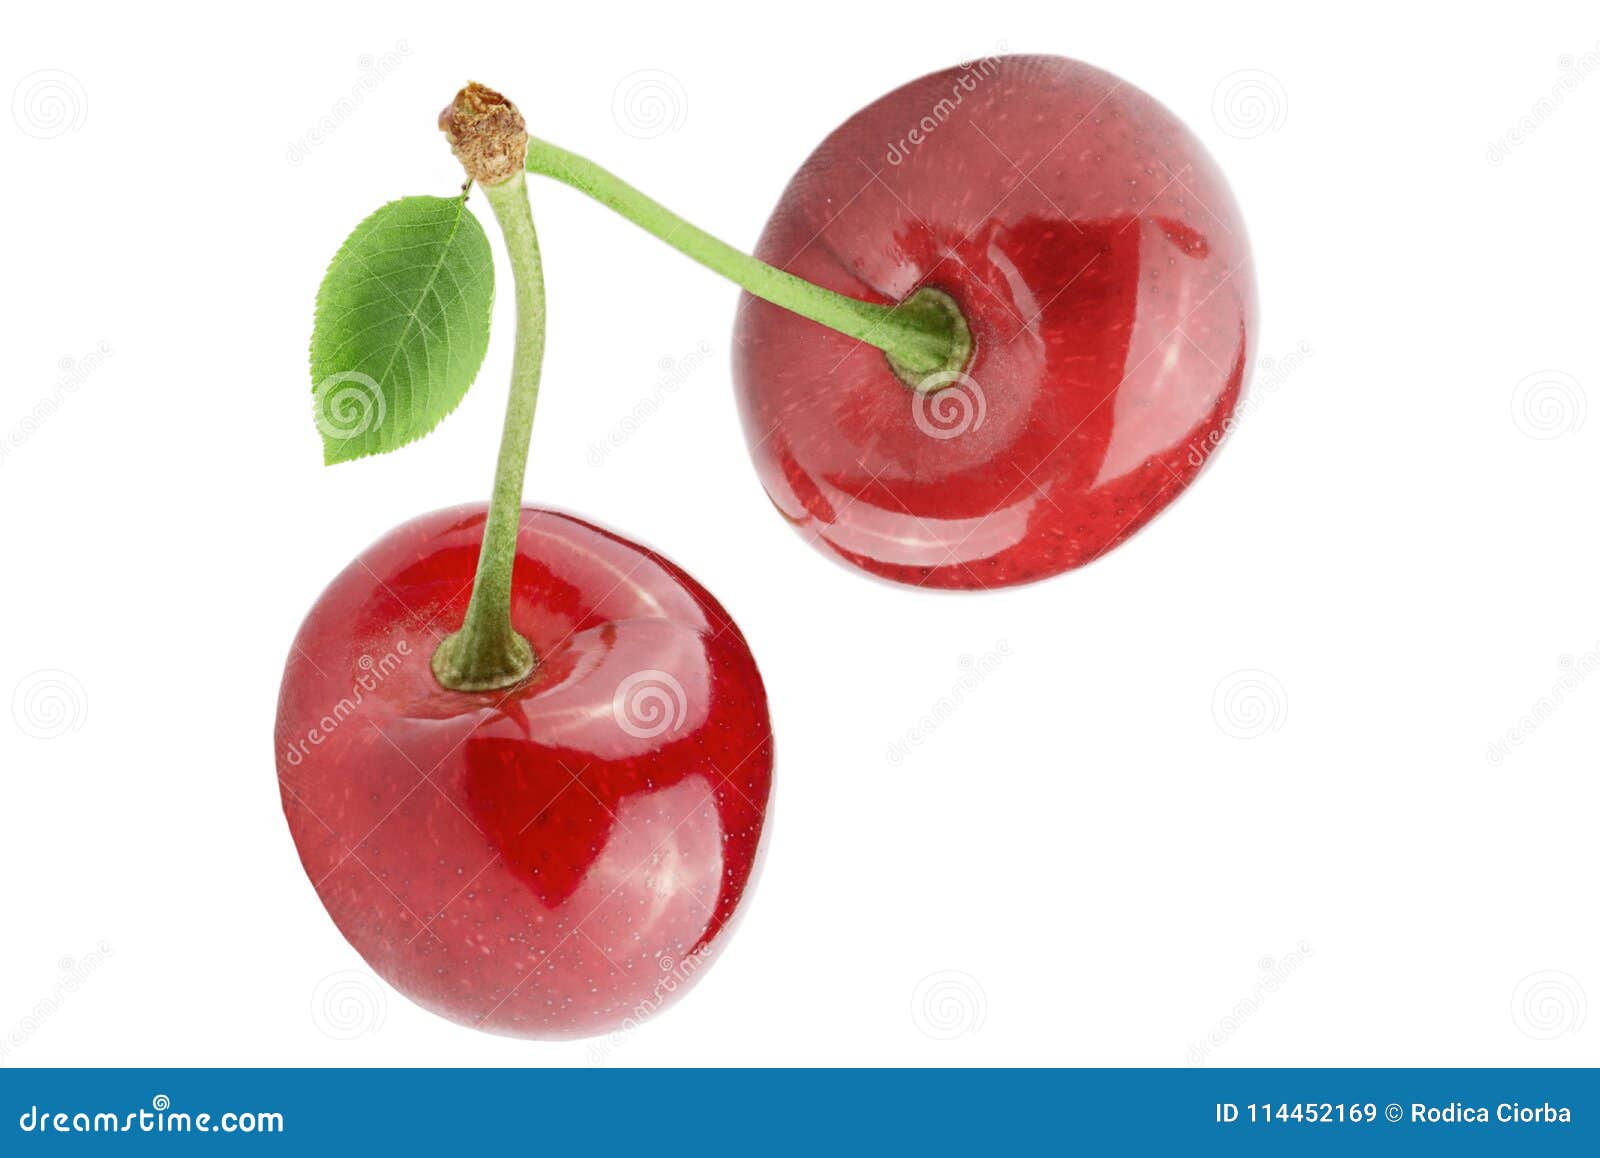 Two Sweet Cherries With Leaf Isolated On White Stock Image - Image of ...